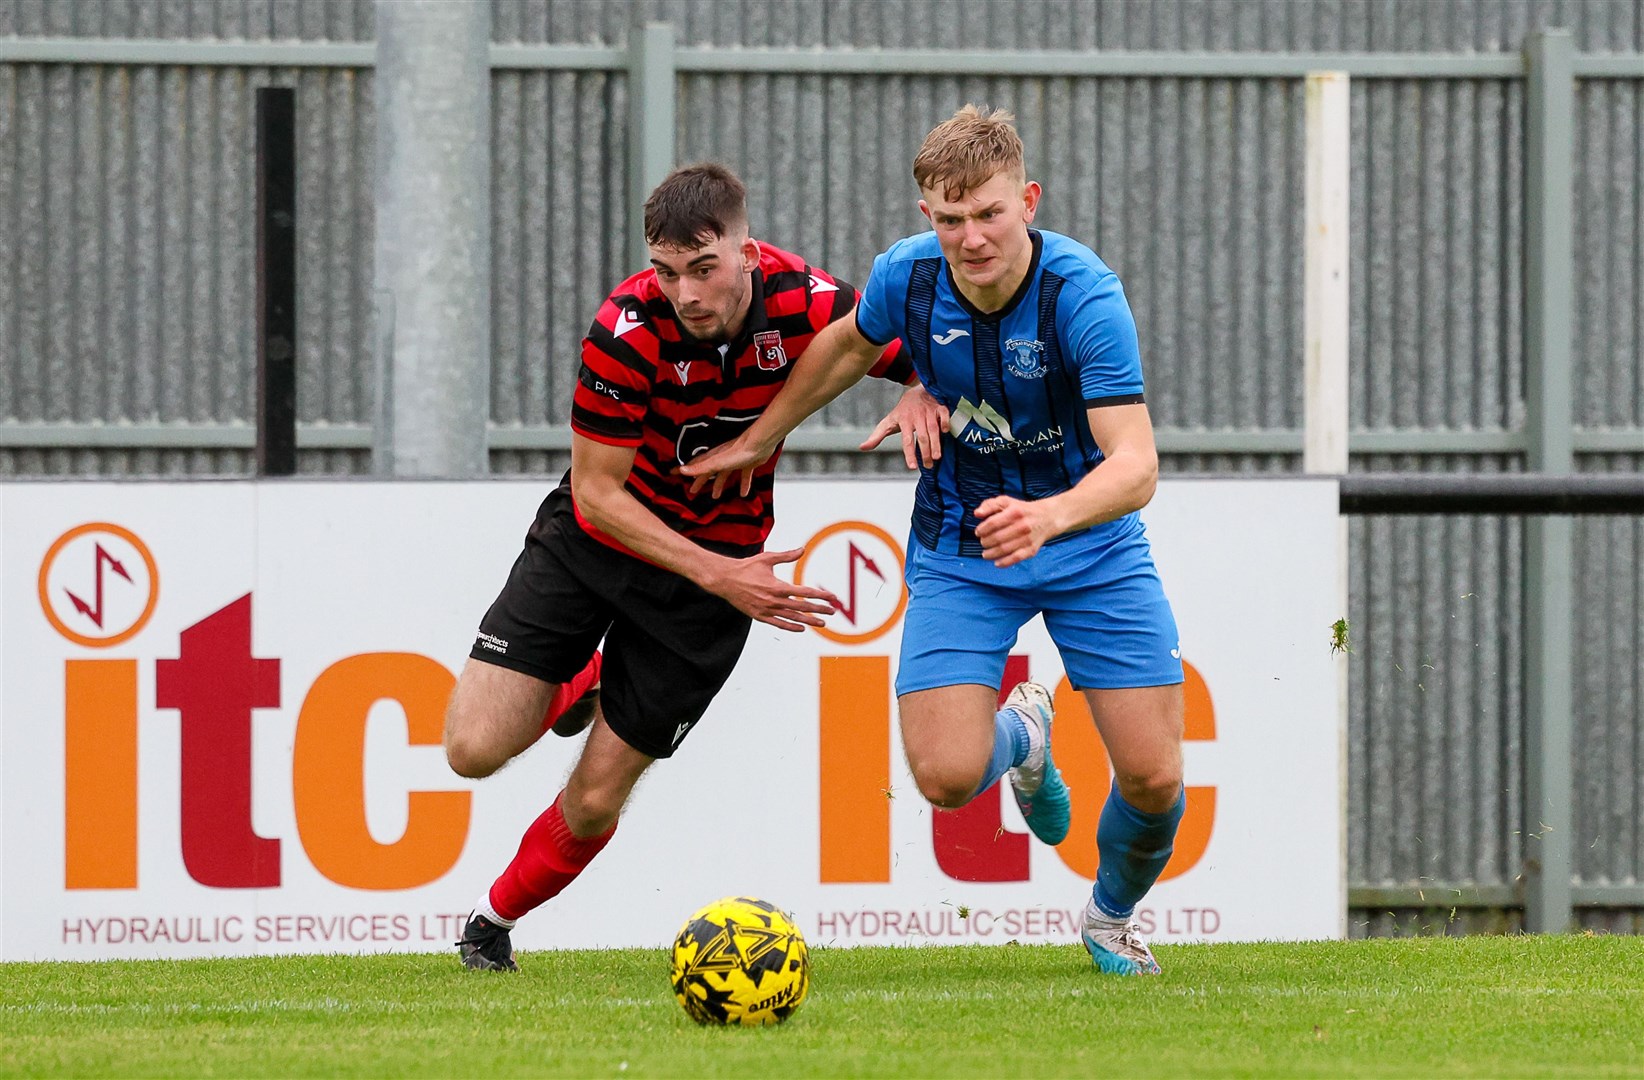 Jack Davison in action for Strathspey Thistle, who were soundly beaten by Inverurie Locos at Harlaw Park. Photo: Kevin Taylor Photography